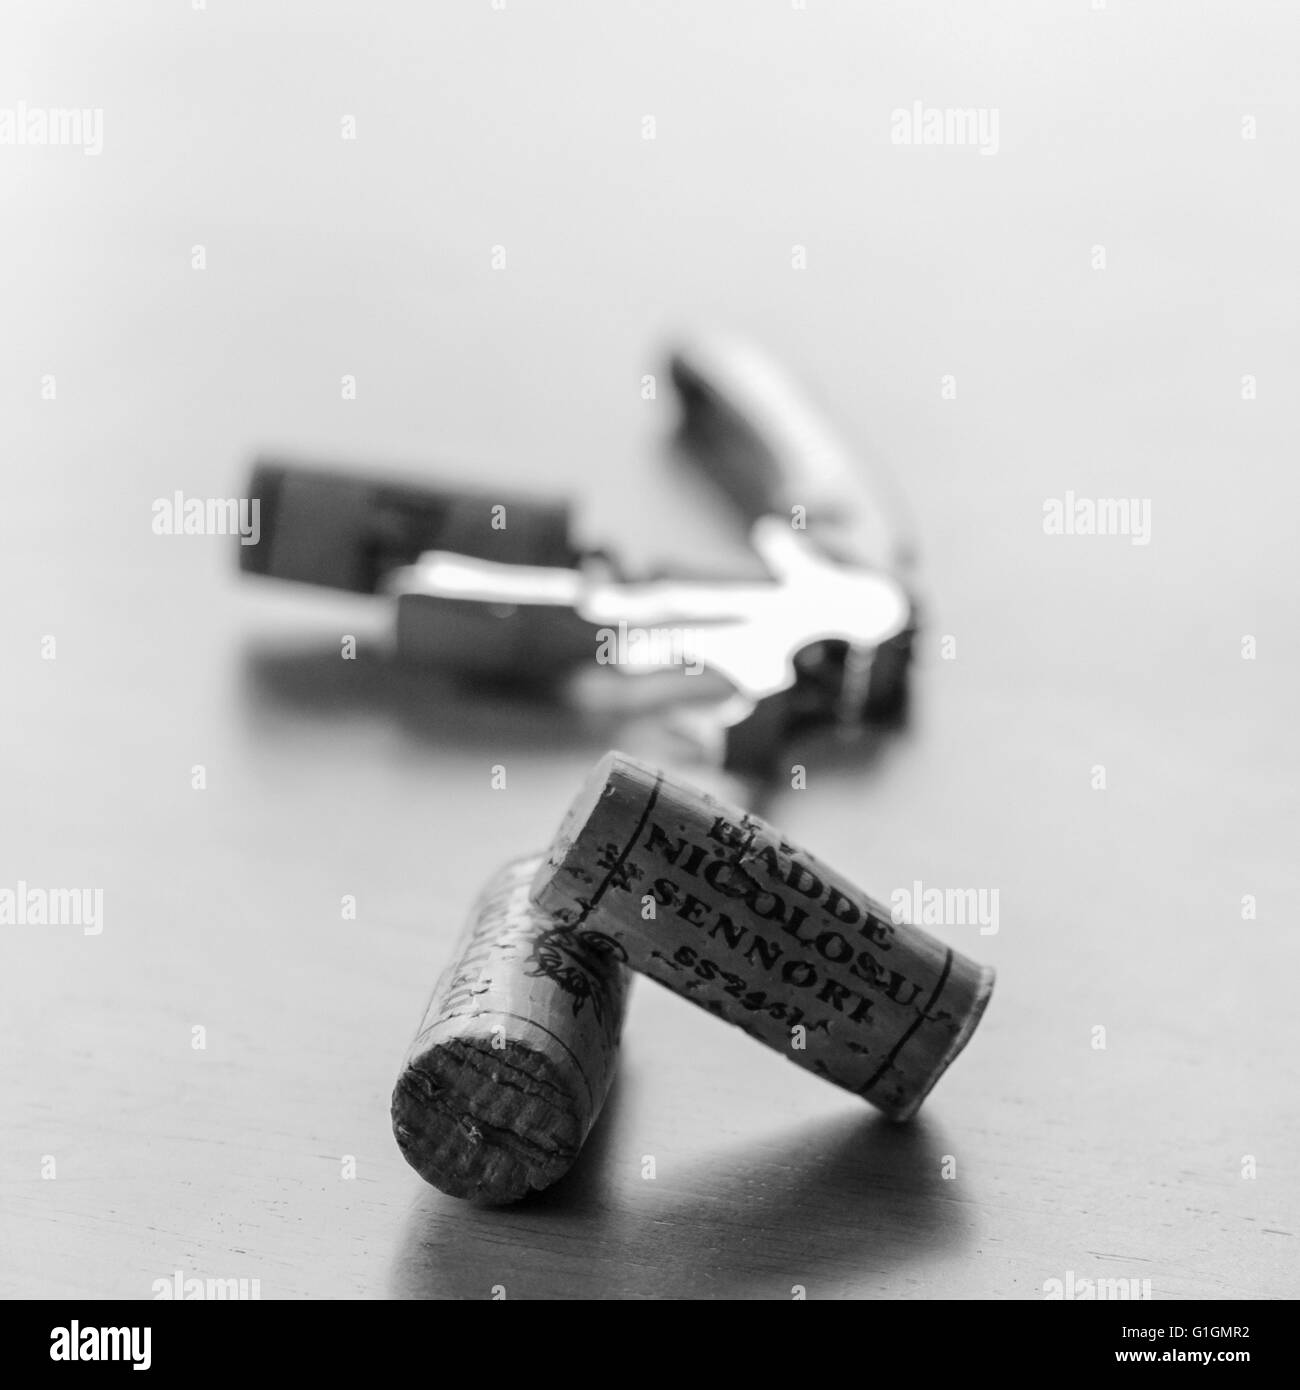 Black and white image of corks and a cork screw. Stock Photo